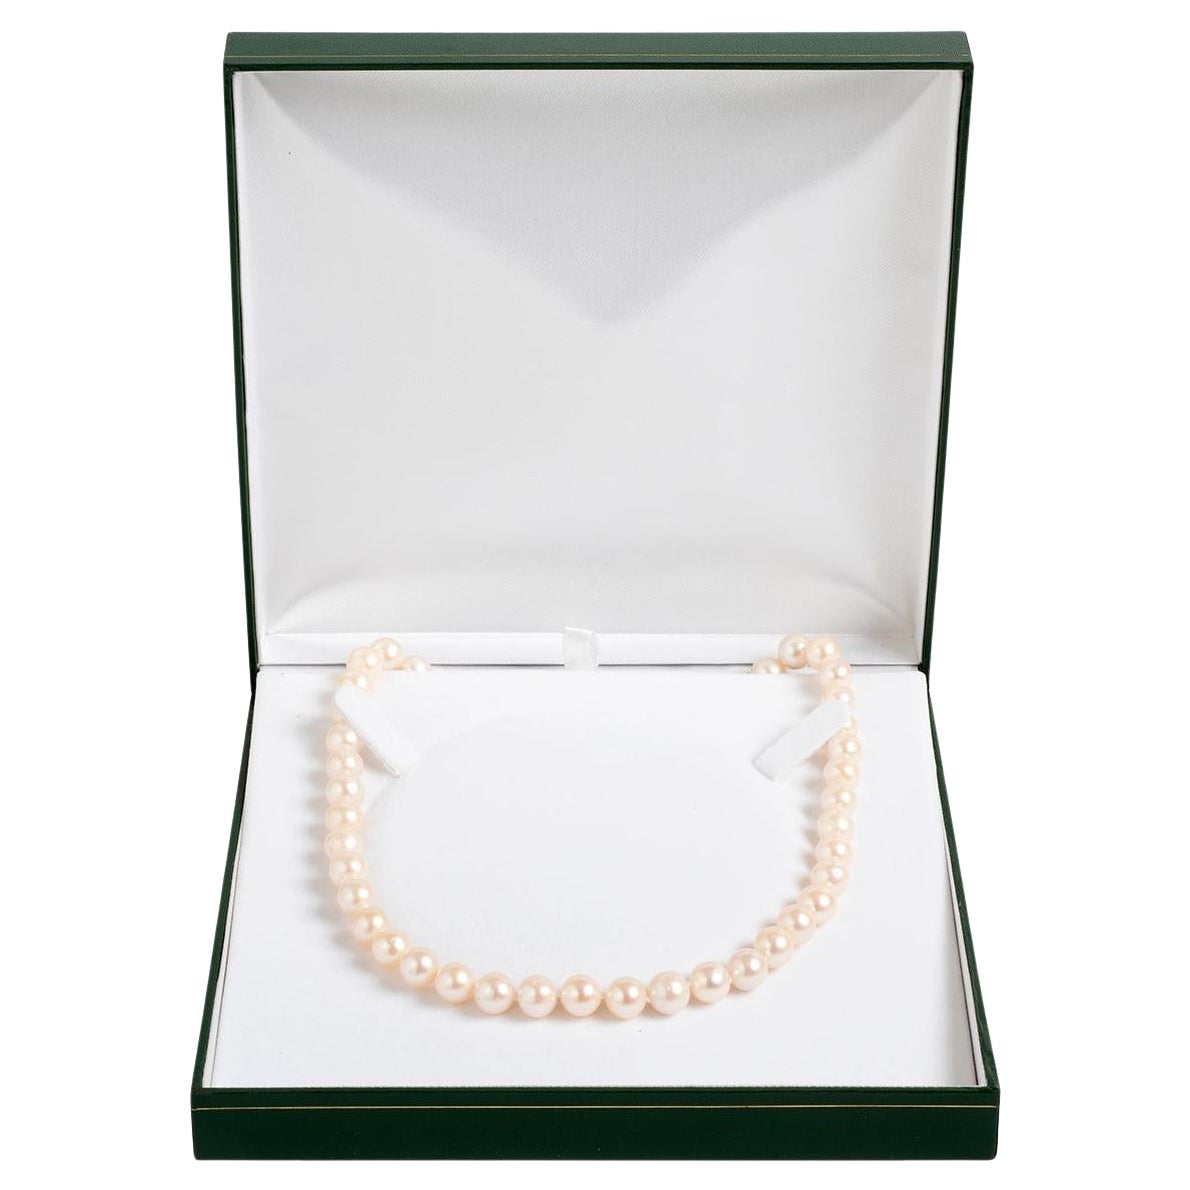 Art Deco Cultured Pearl Necklace, 14 Karat White Gold and Diamond Clasp ...